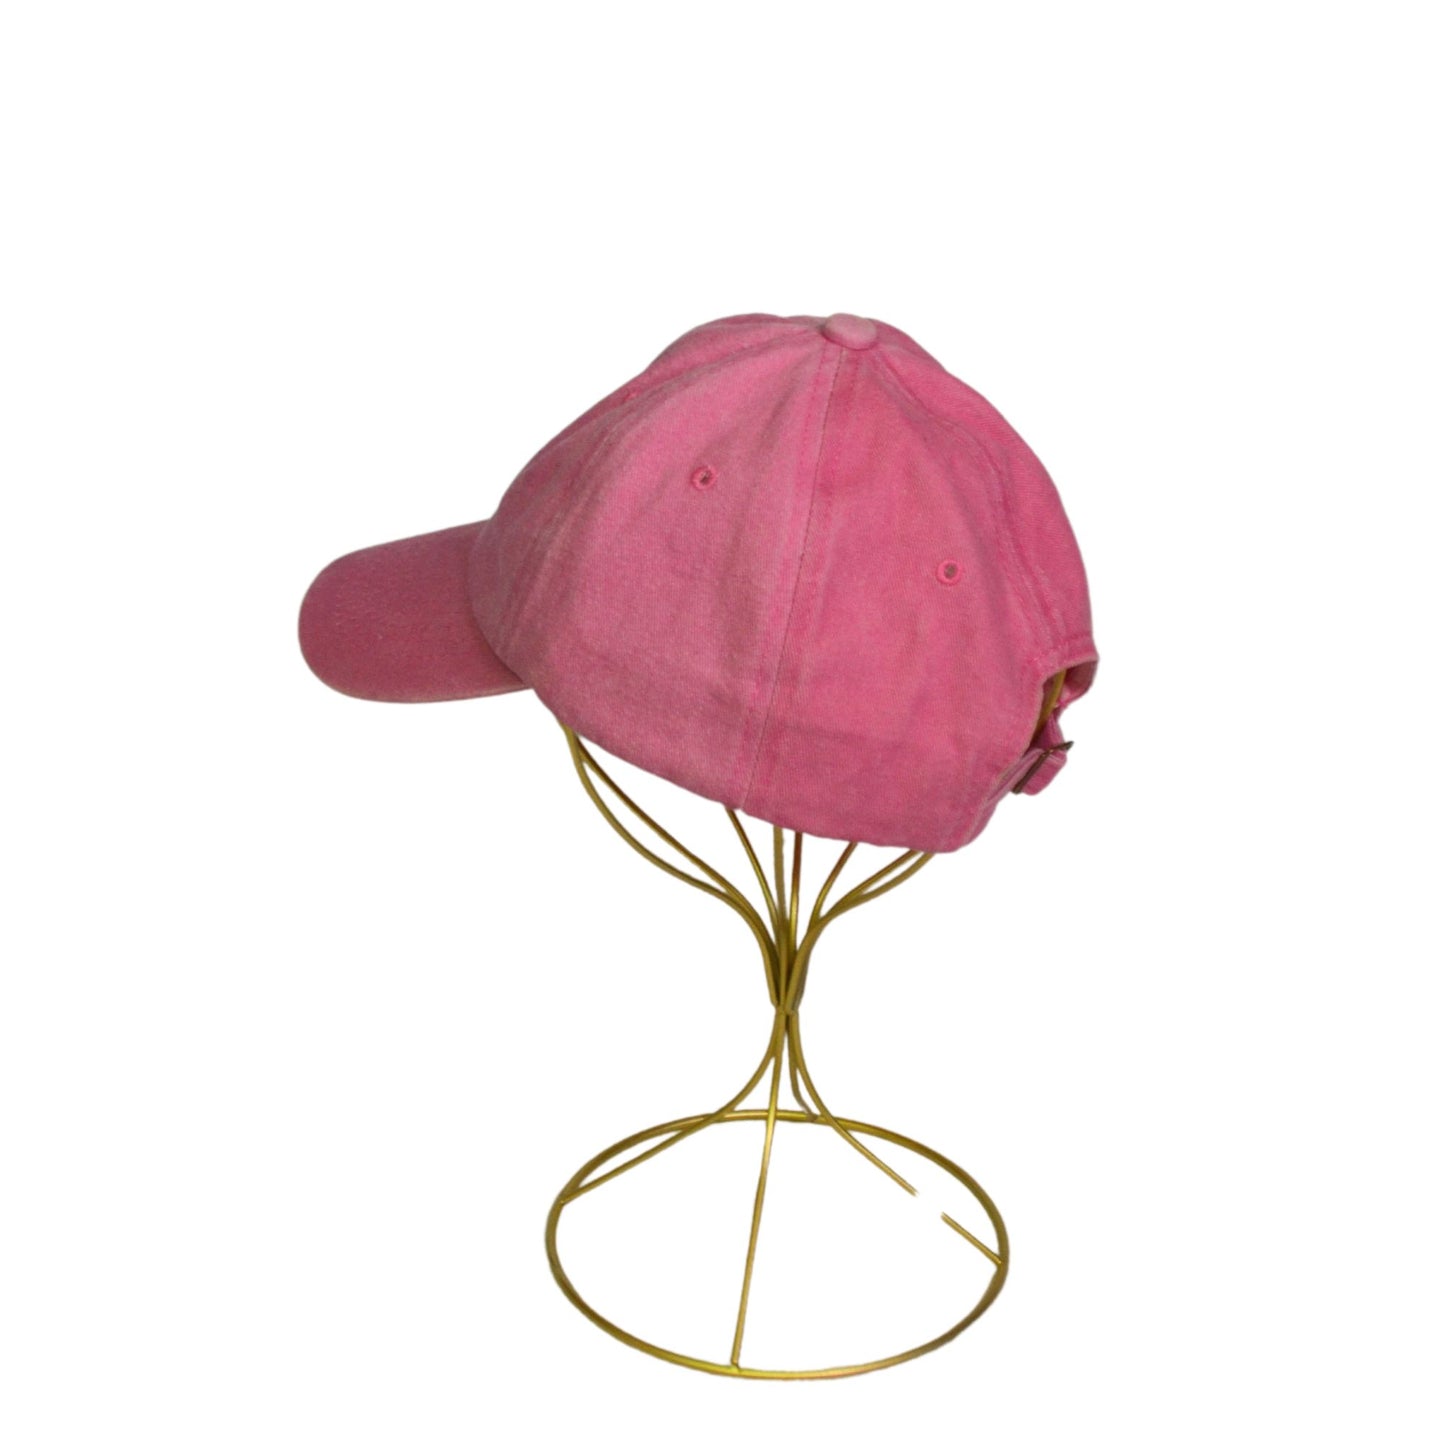 Pink Baseball Hat Bouquet | Embroidered Hats-Thread & Ember